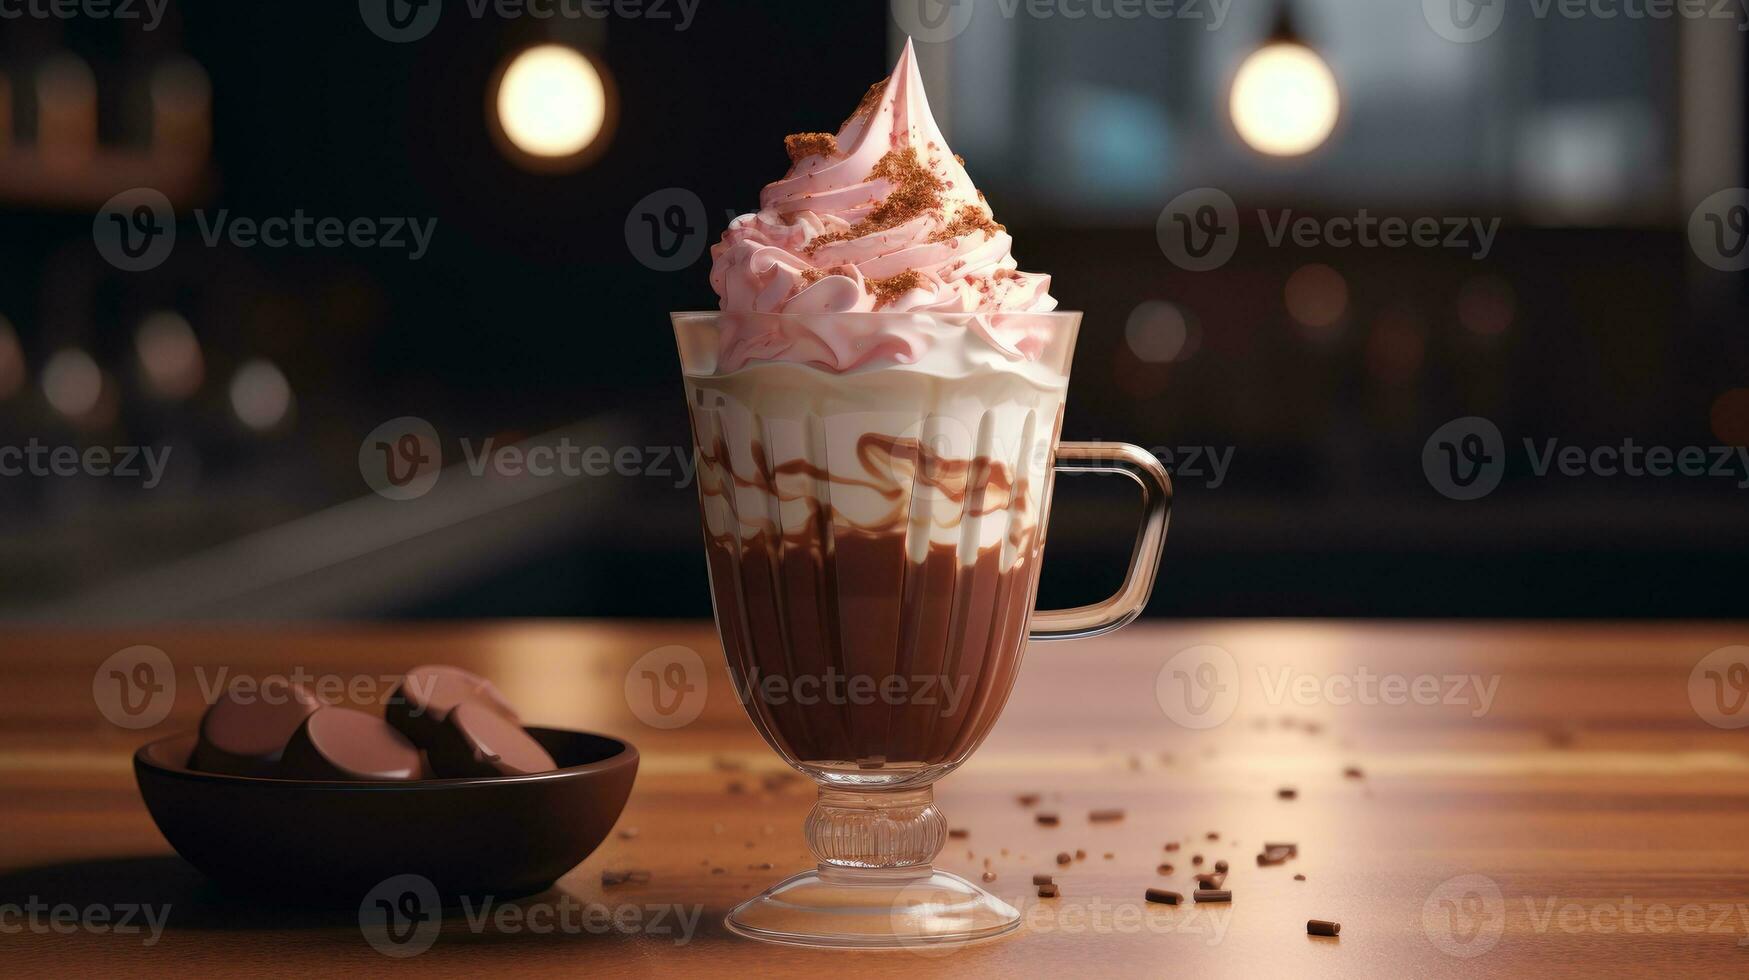 Chocolate pudding ice cream with whipped cream in a glass bowl photo